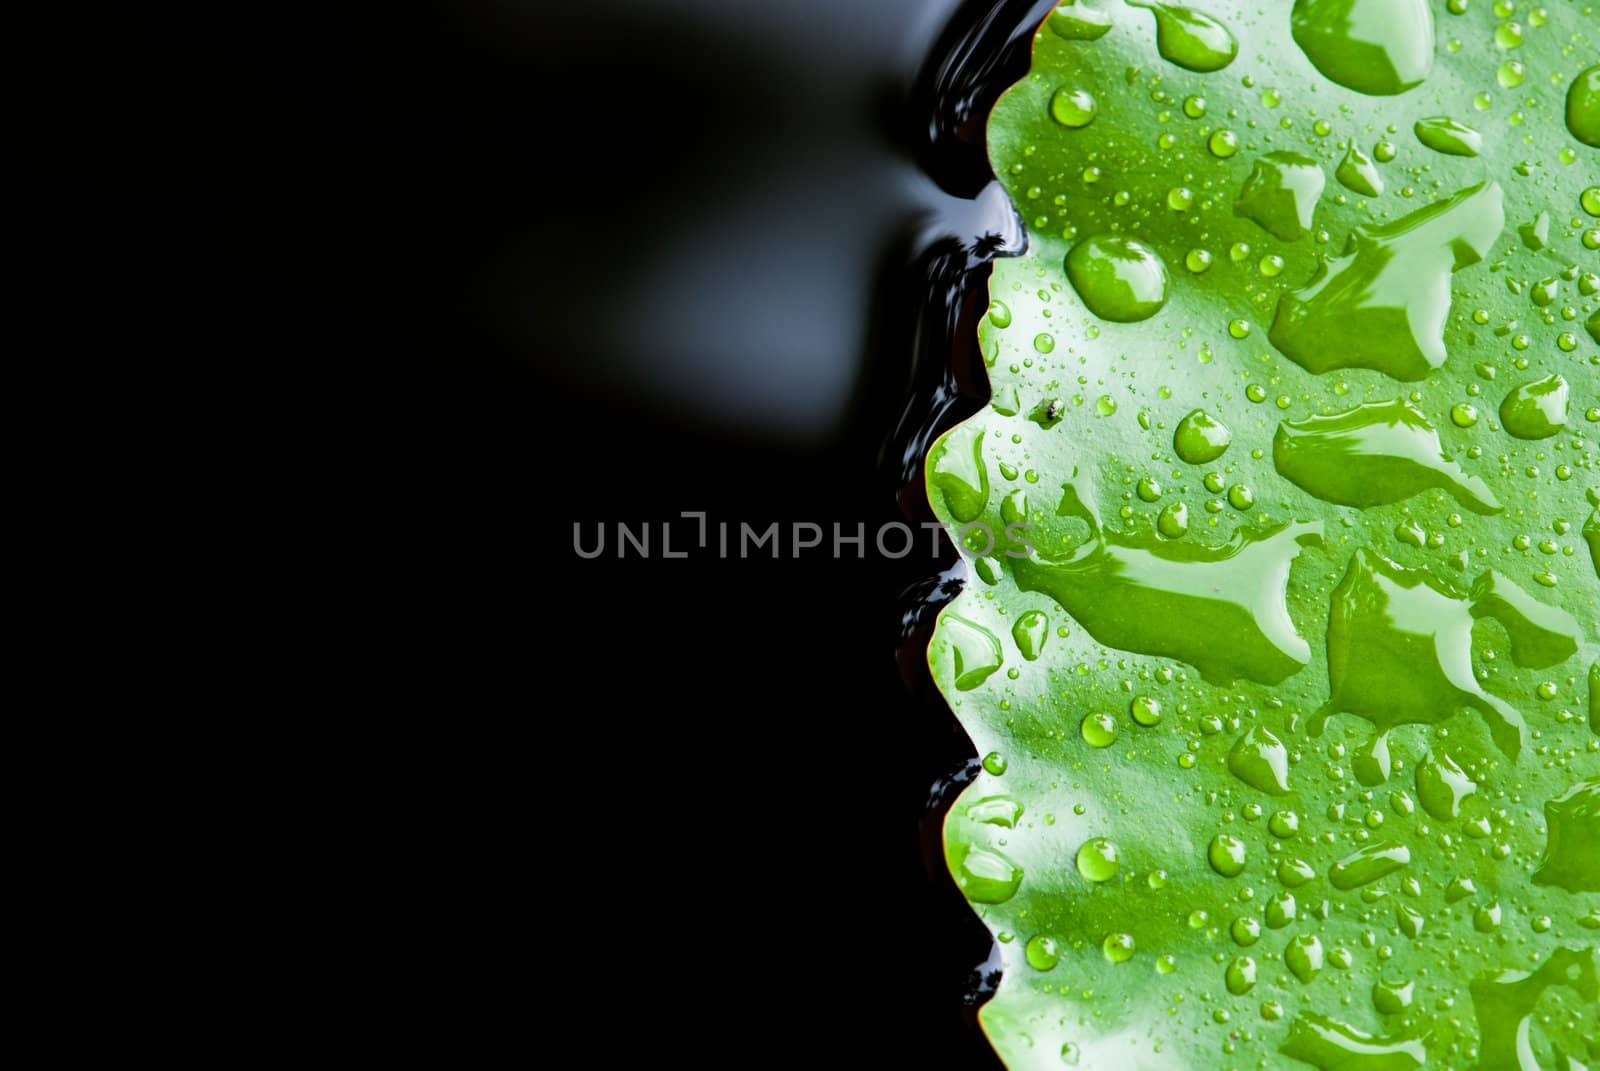 close up of rain drop on lotus leaf on the right side
 by sasilsolutions